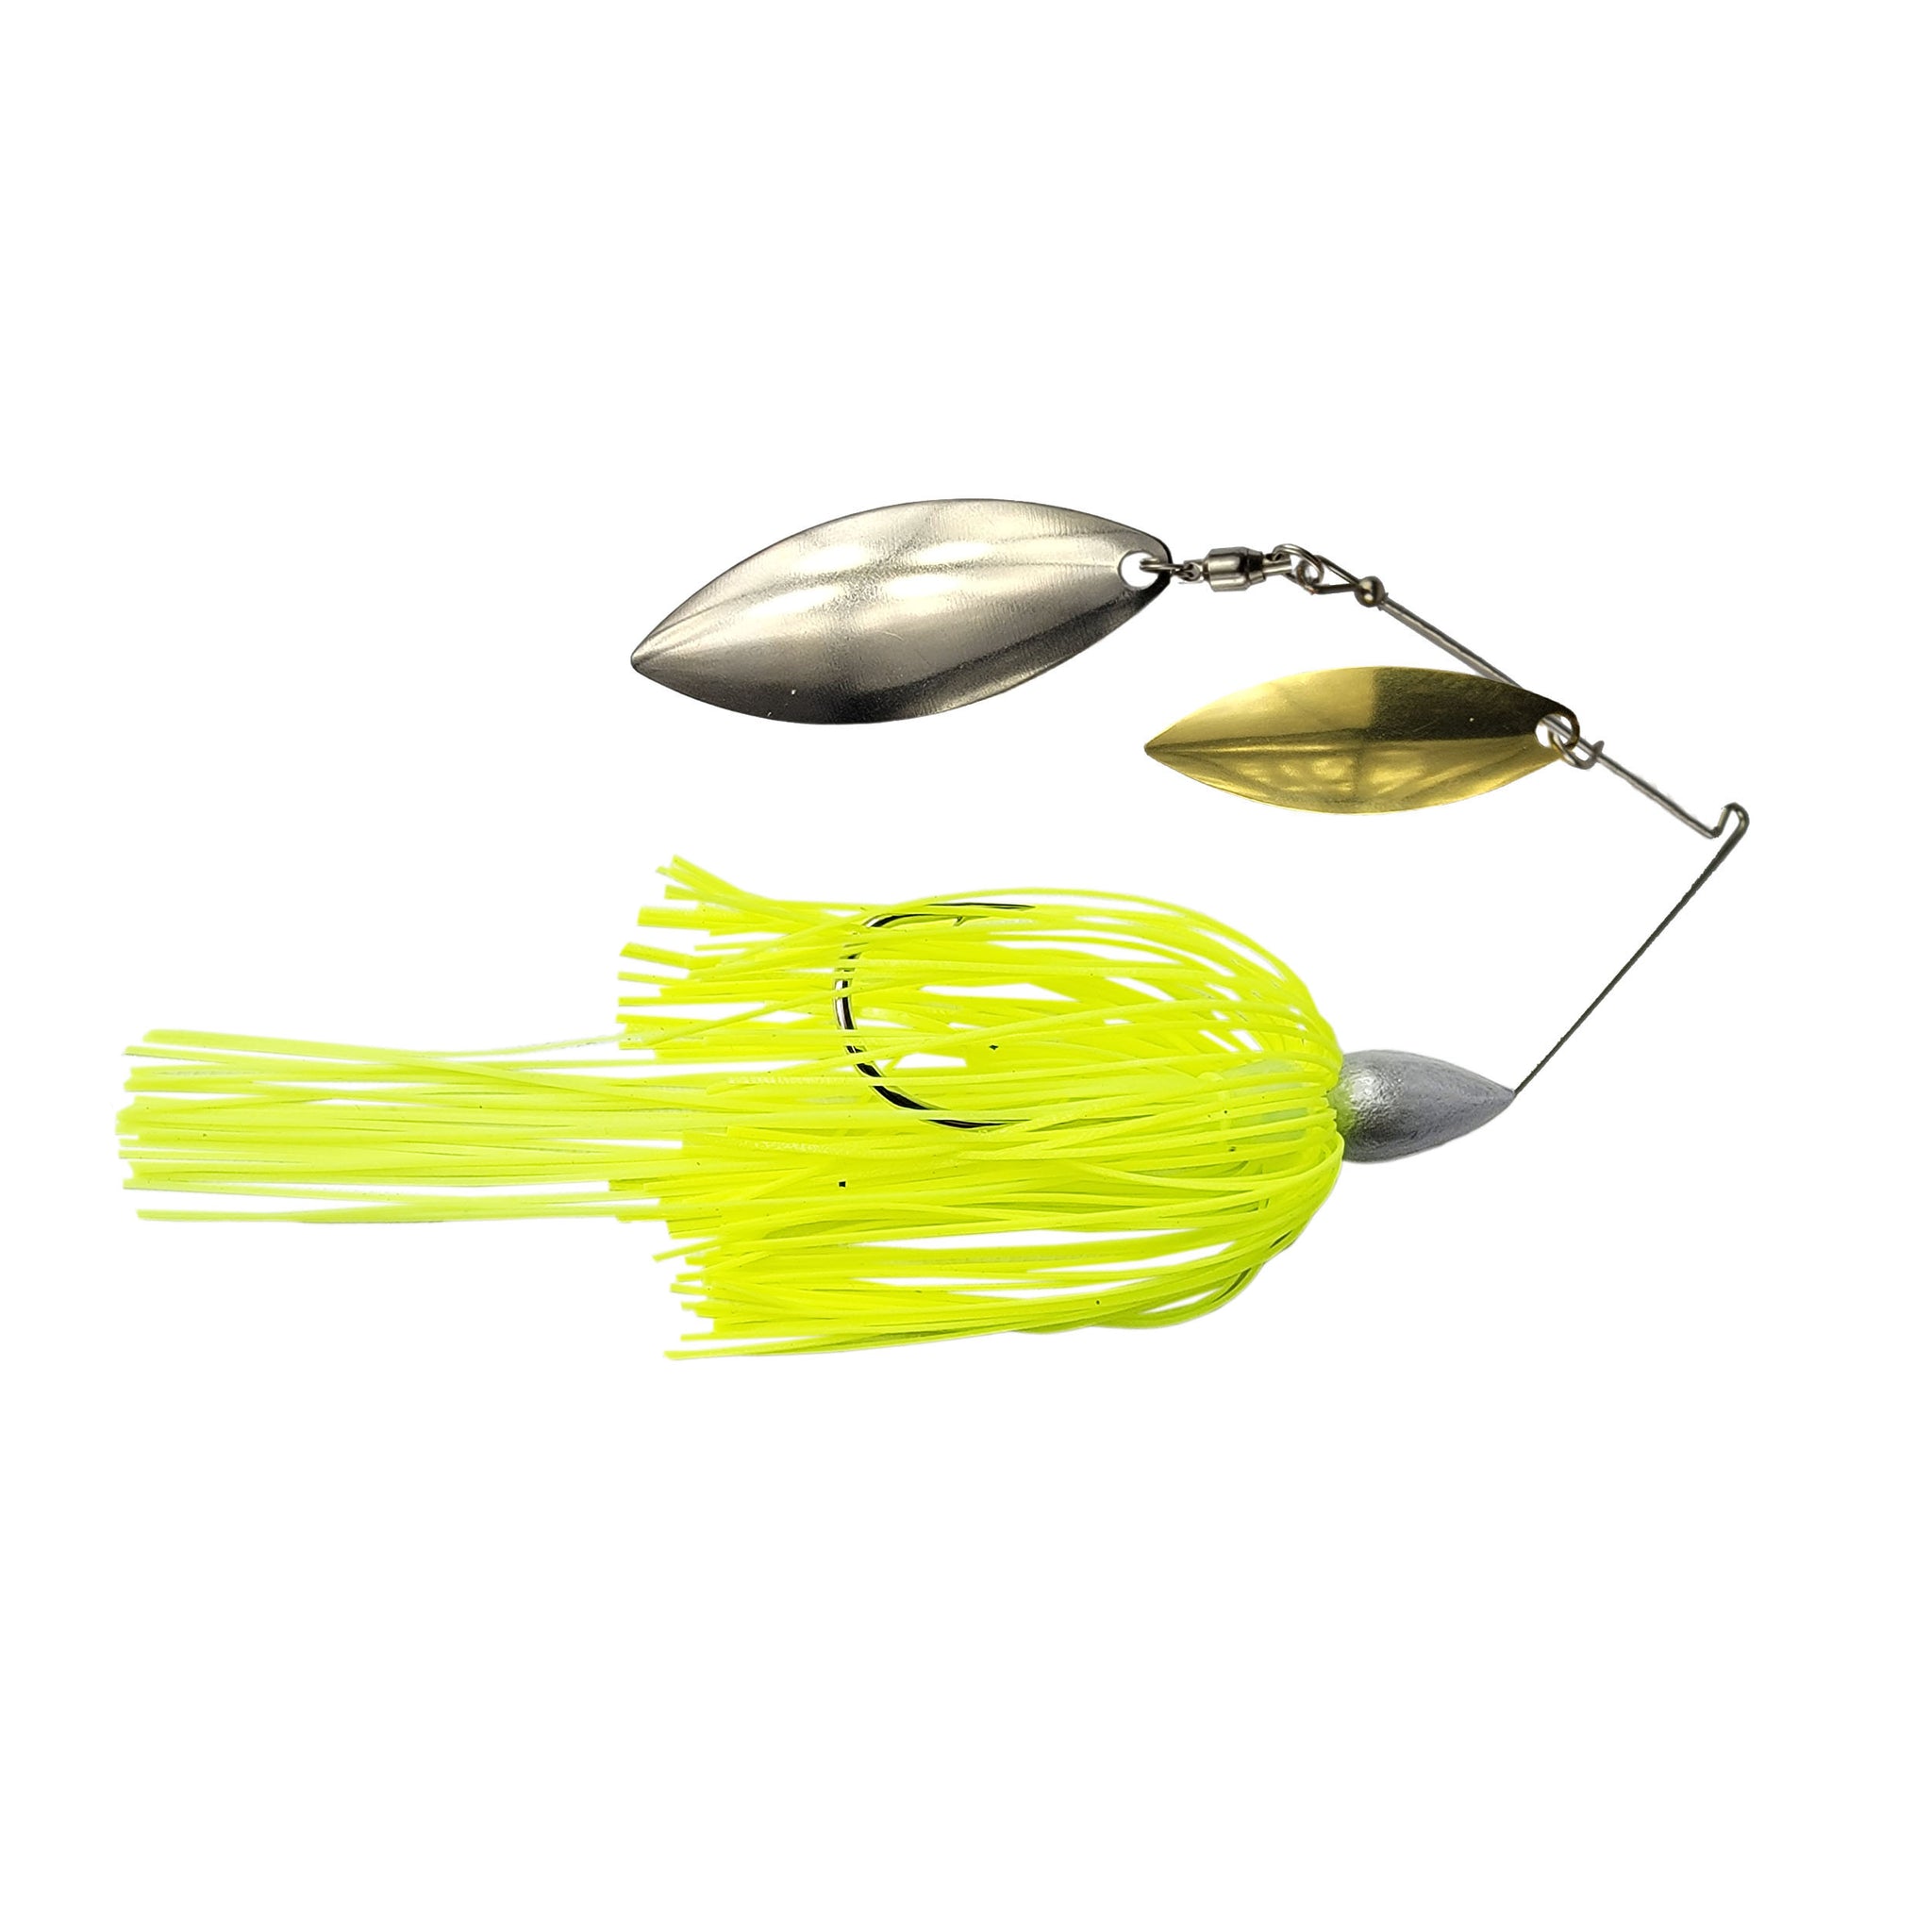 Tackle HD CS-II-DW Spinnerbait 3/8-Ounce - Chartreuse